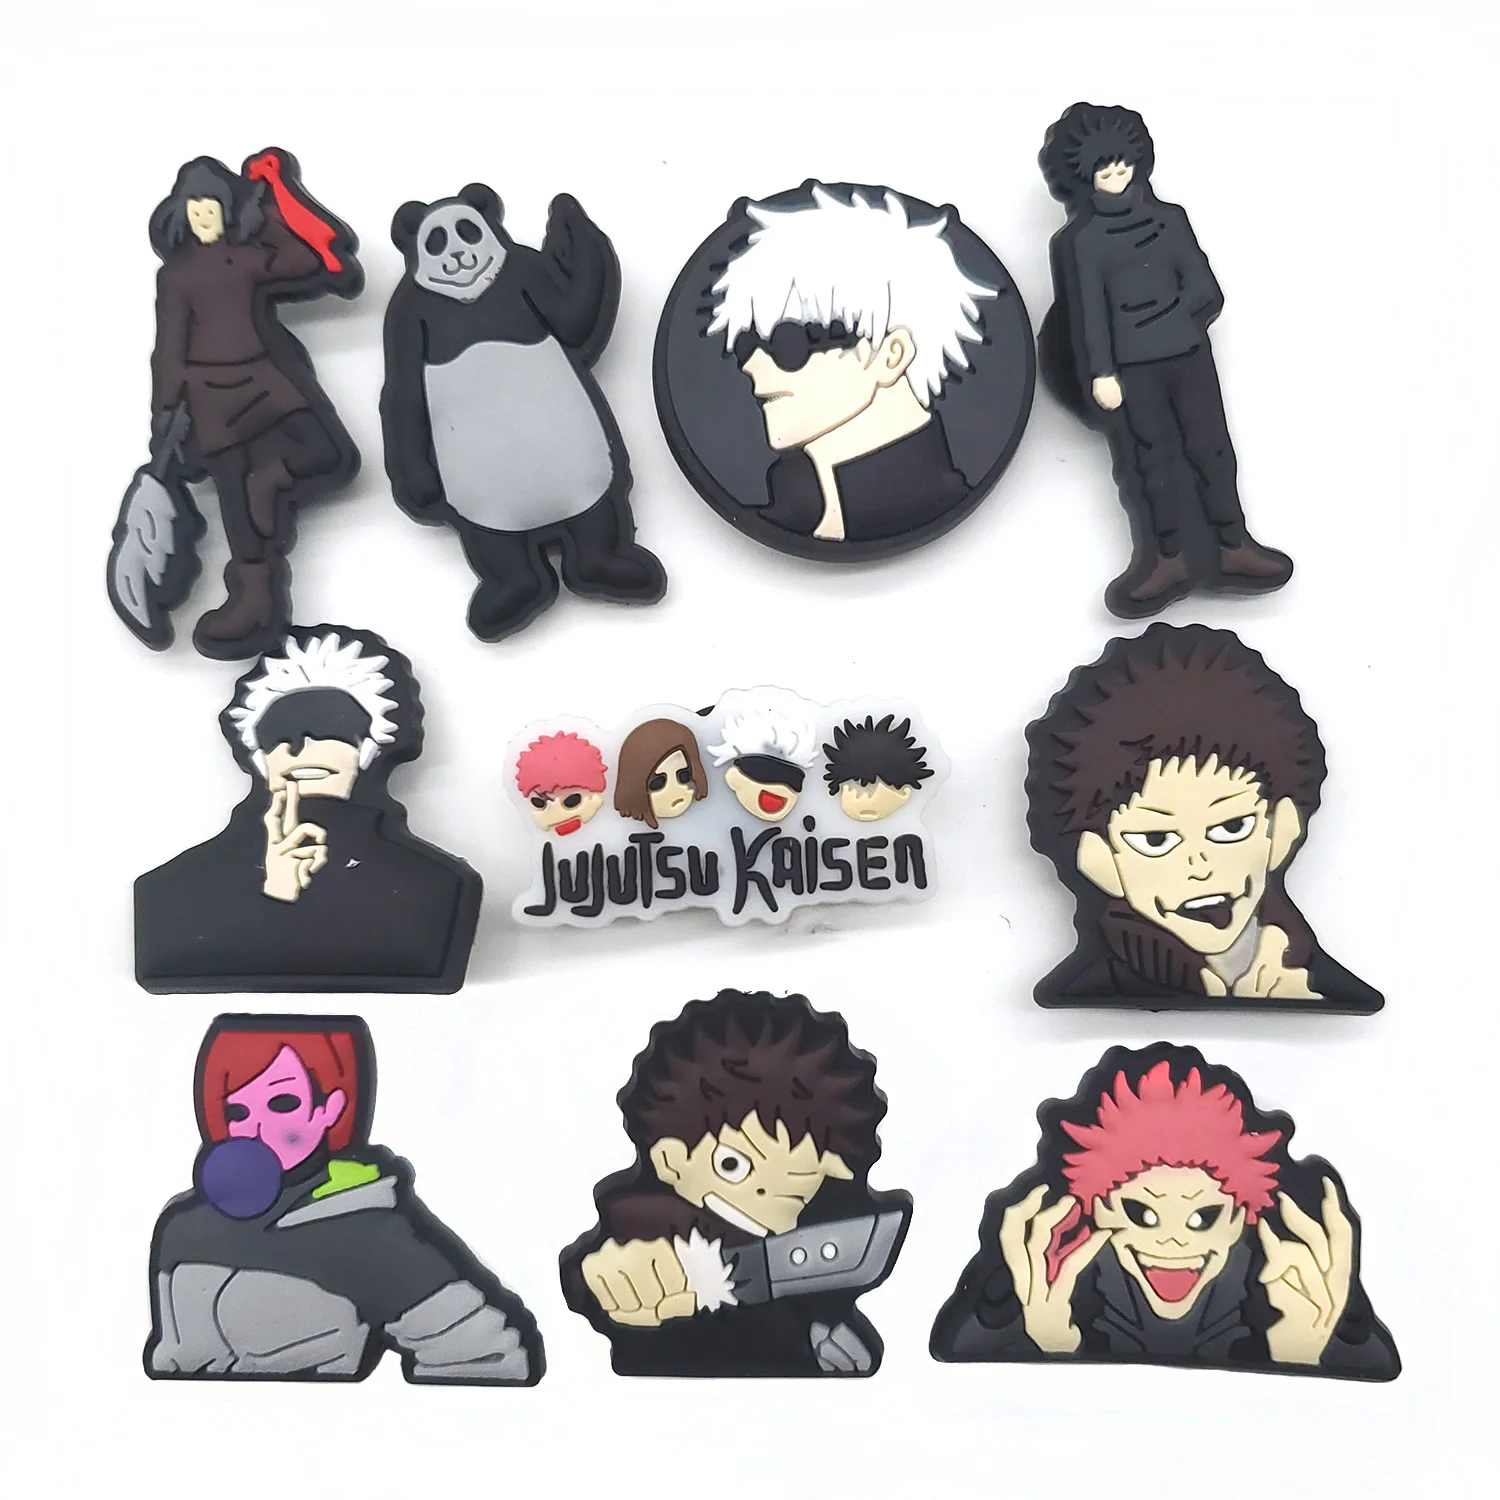 

10pcs/Set Handsome anime characters Shoe Charms for Croc Sandals Funny jibz Clogs Decoration PVC Accessories Unisex Kids Gifts